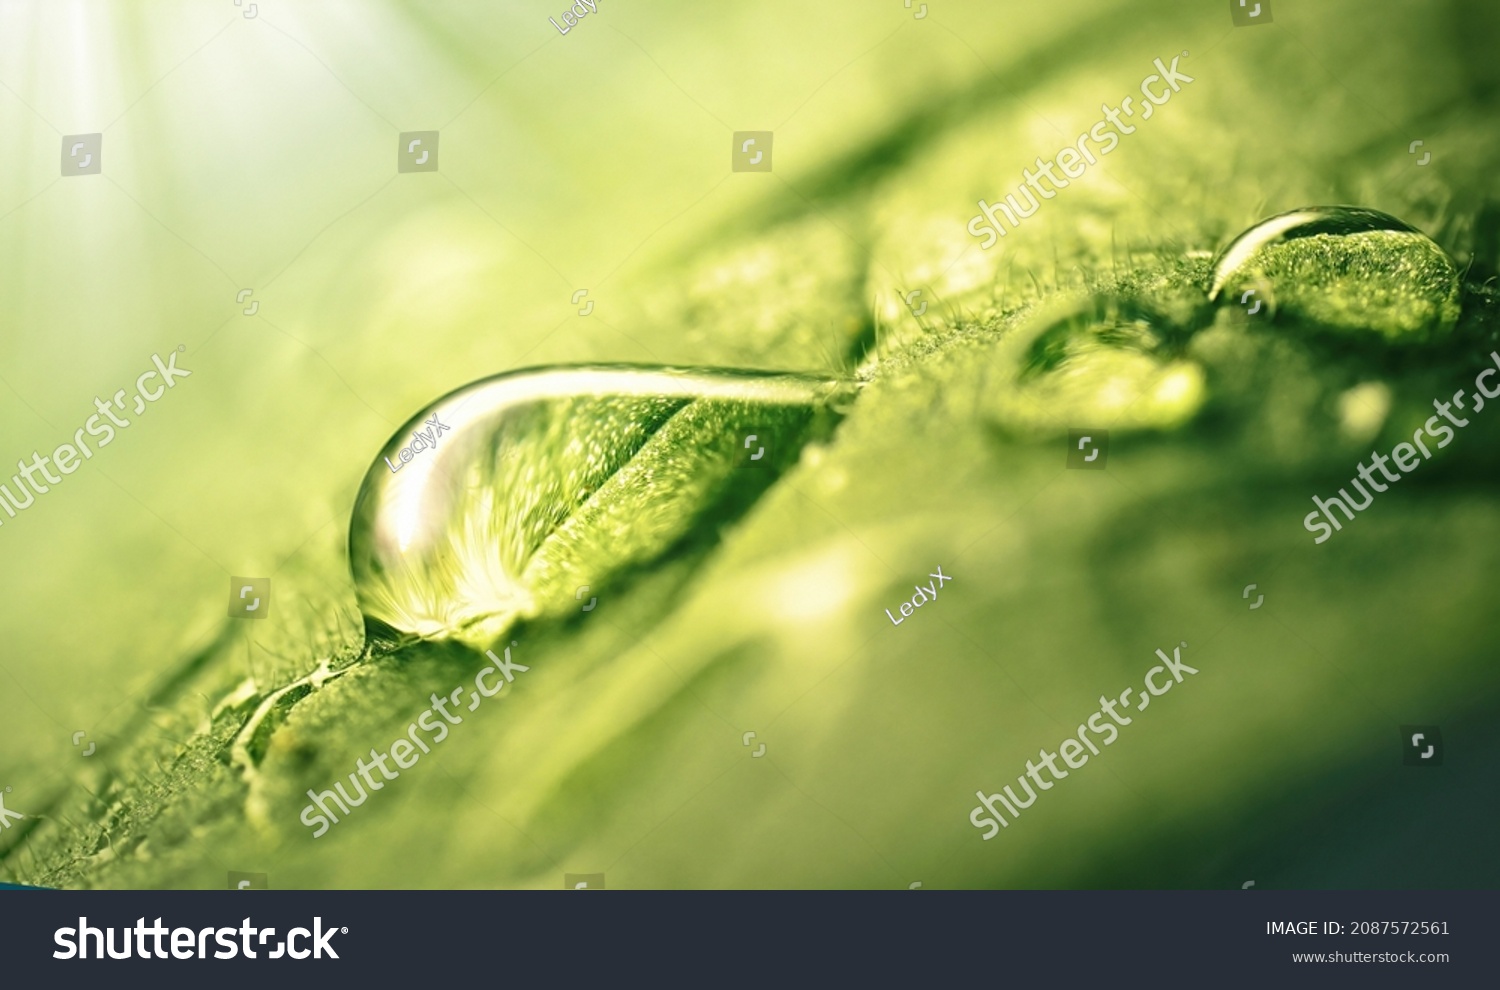 Very beautiful macro image of natural illuminated water droplets on surface of green leaf or stem of grass, symbol of fragility and purity nature. #2087572561